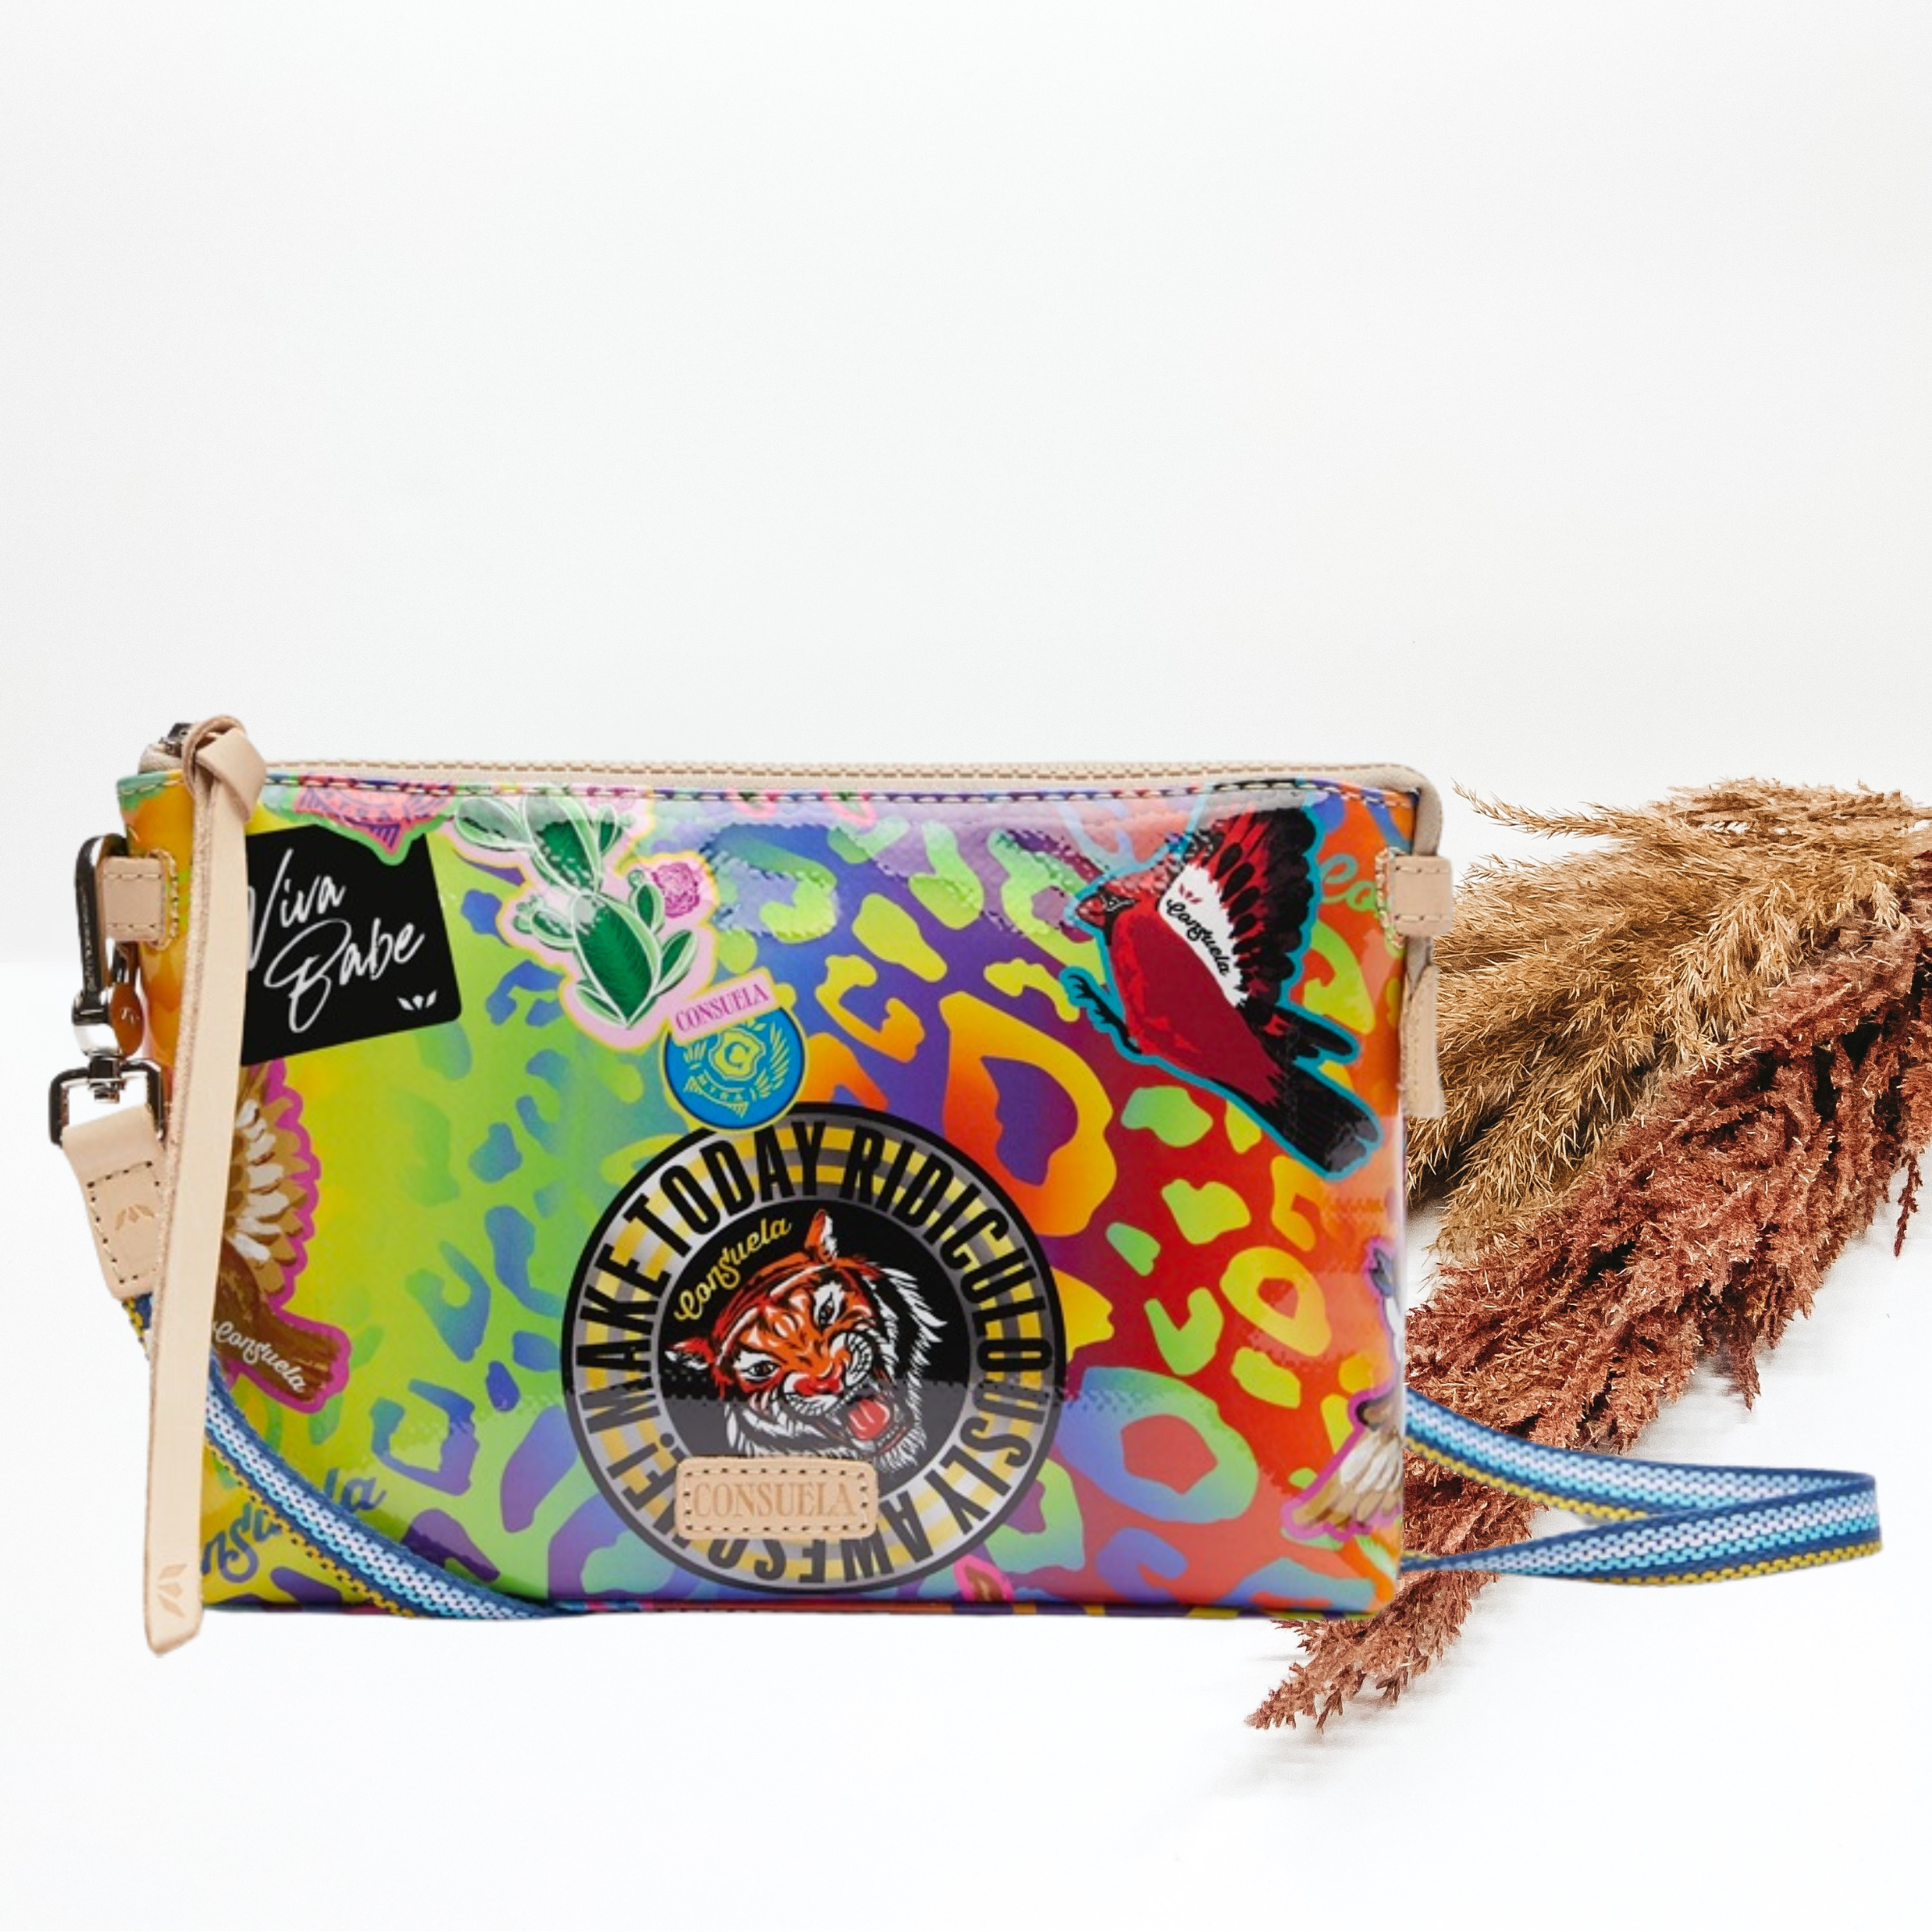 Pictured is a rectangle crossbody purse. This purse has a mostly a multicolored leopard print design. It also includes random sticker patches throughout the bag and a top zipper. This purse is pictured on a white background with pompous grass on the right side of the picture.